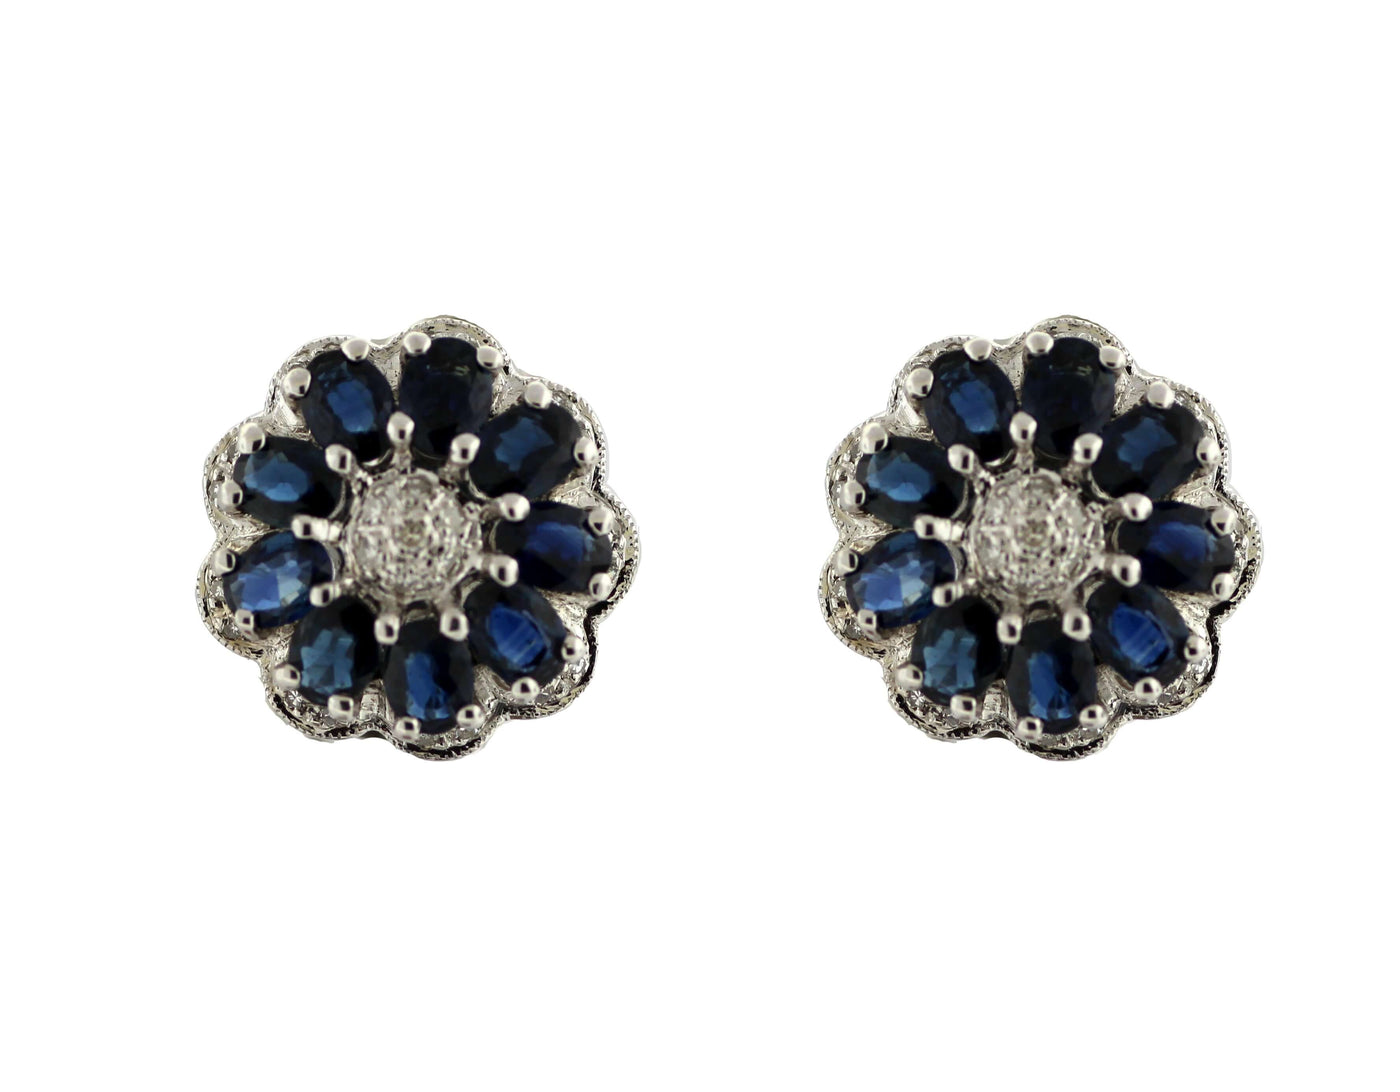 14KW 4.50 CTTW SAPPHIRE AND DIAMOND EARRINGS .40 CTTW H-SI1